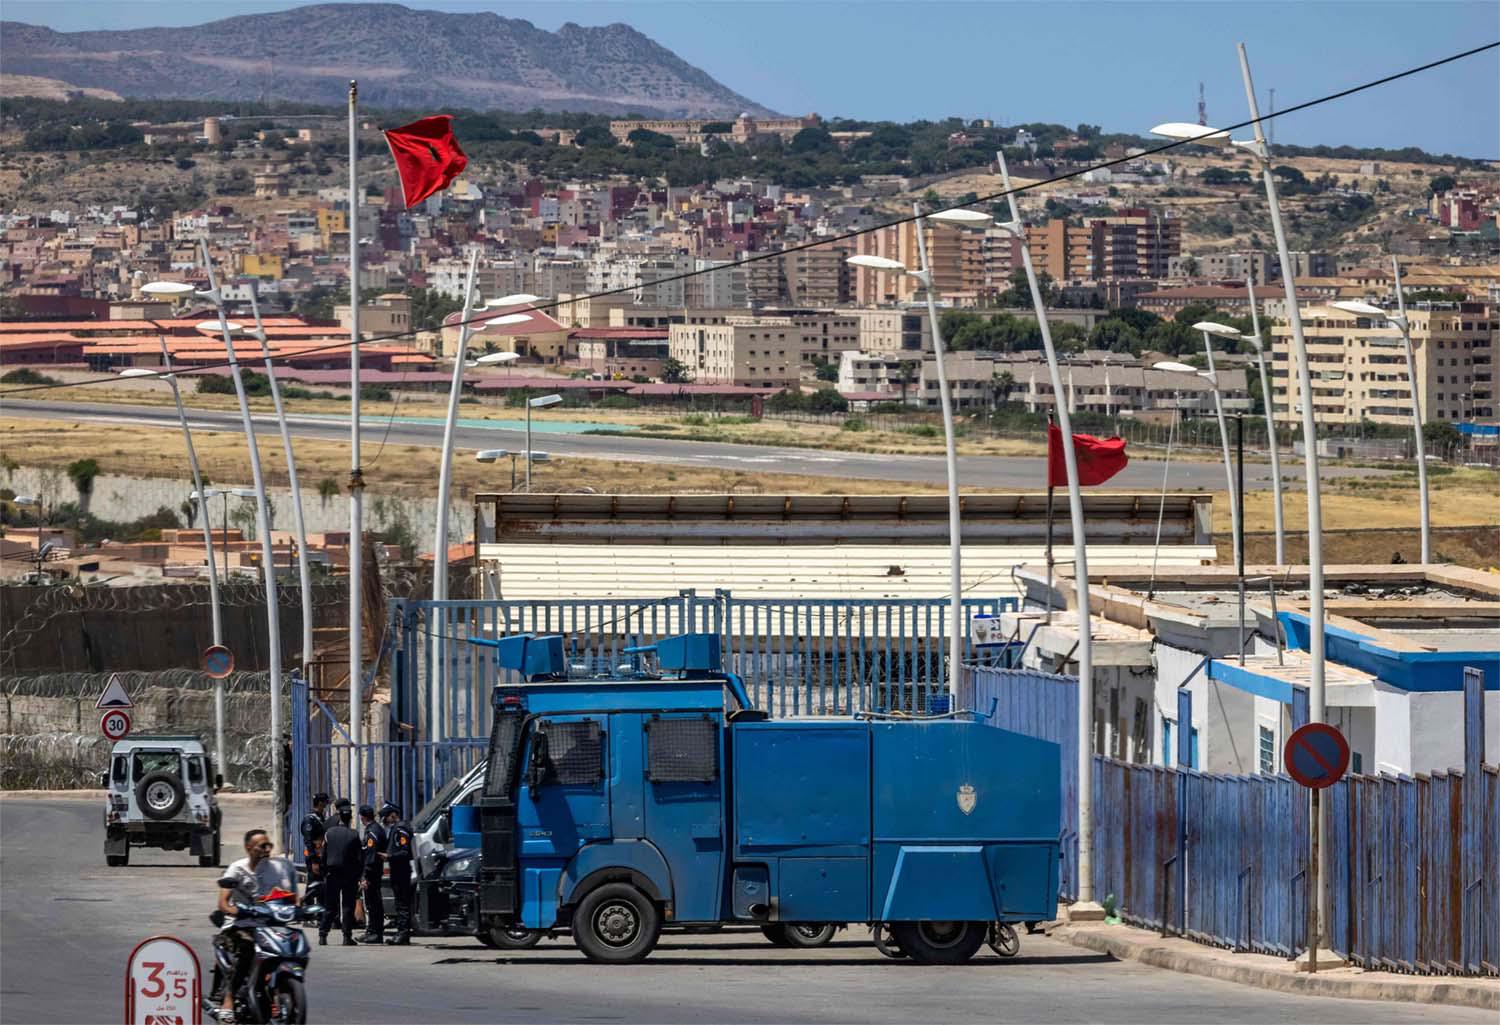 Morocco has also busted 419 migrant trafficking networks